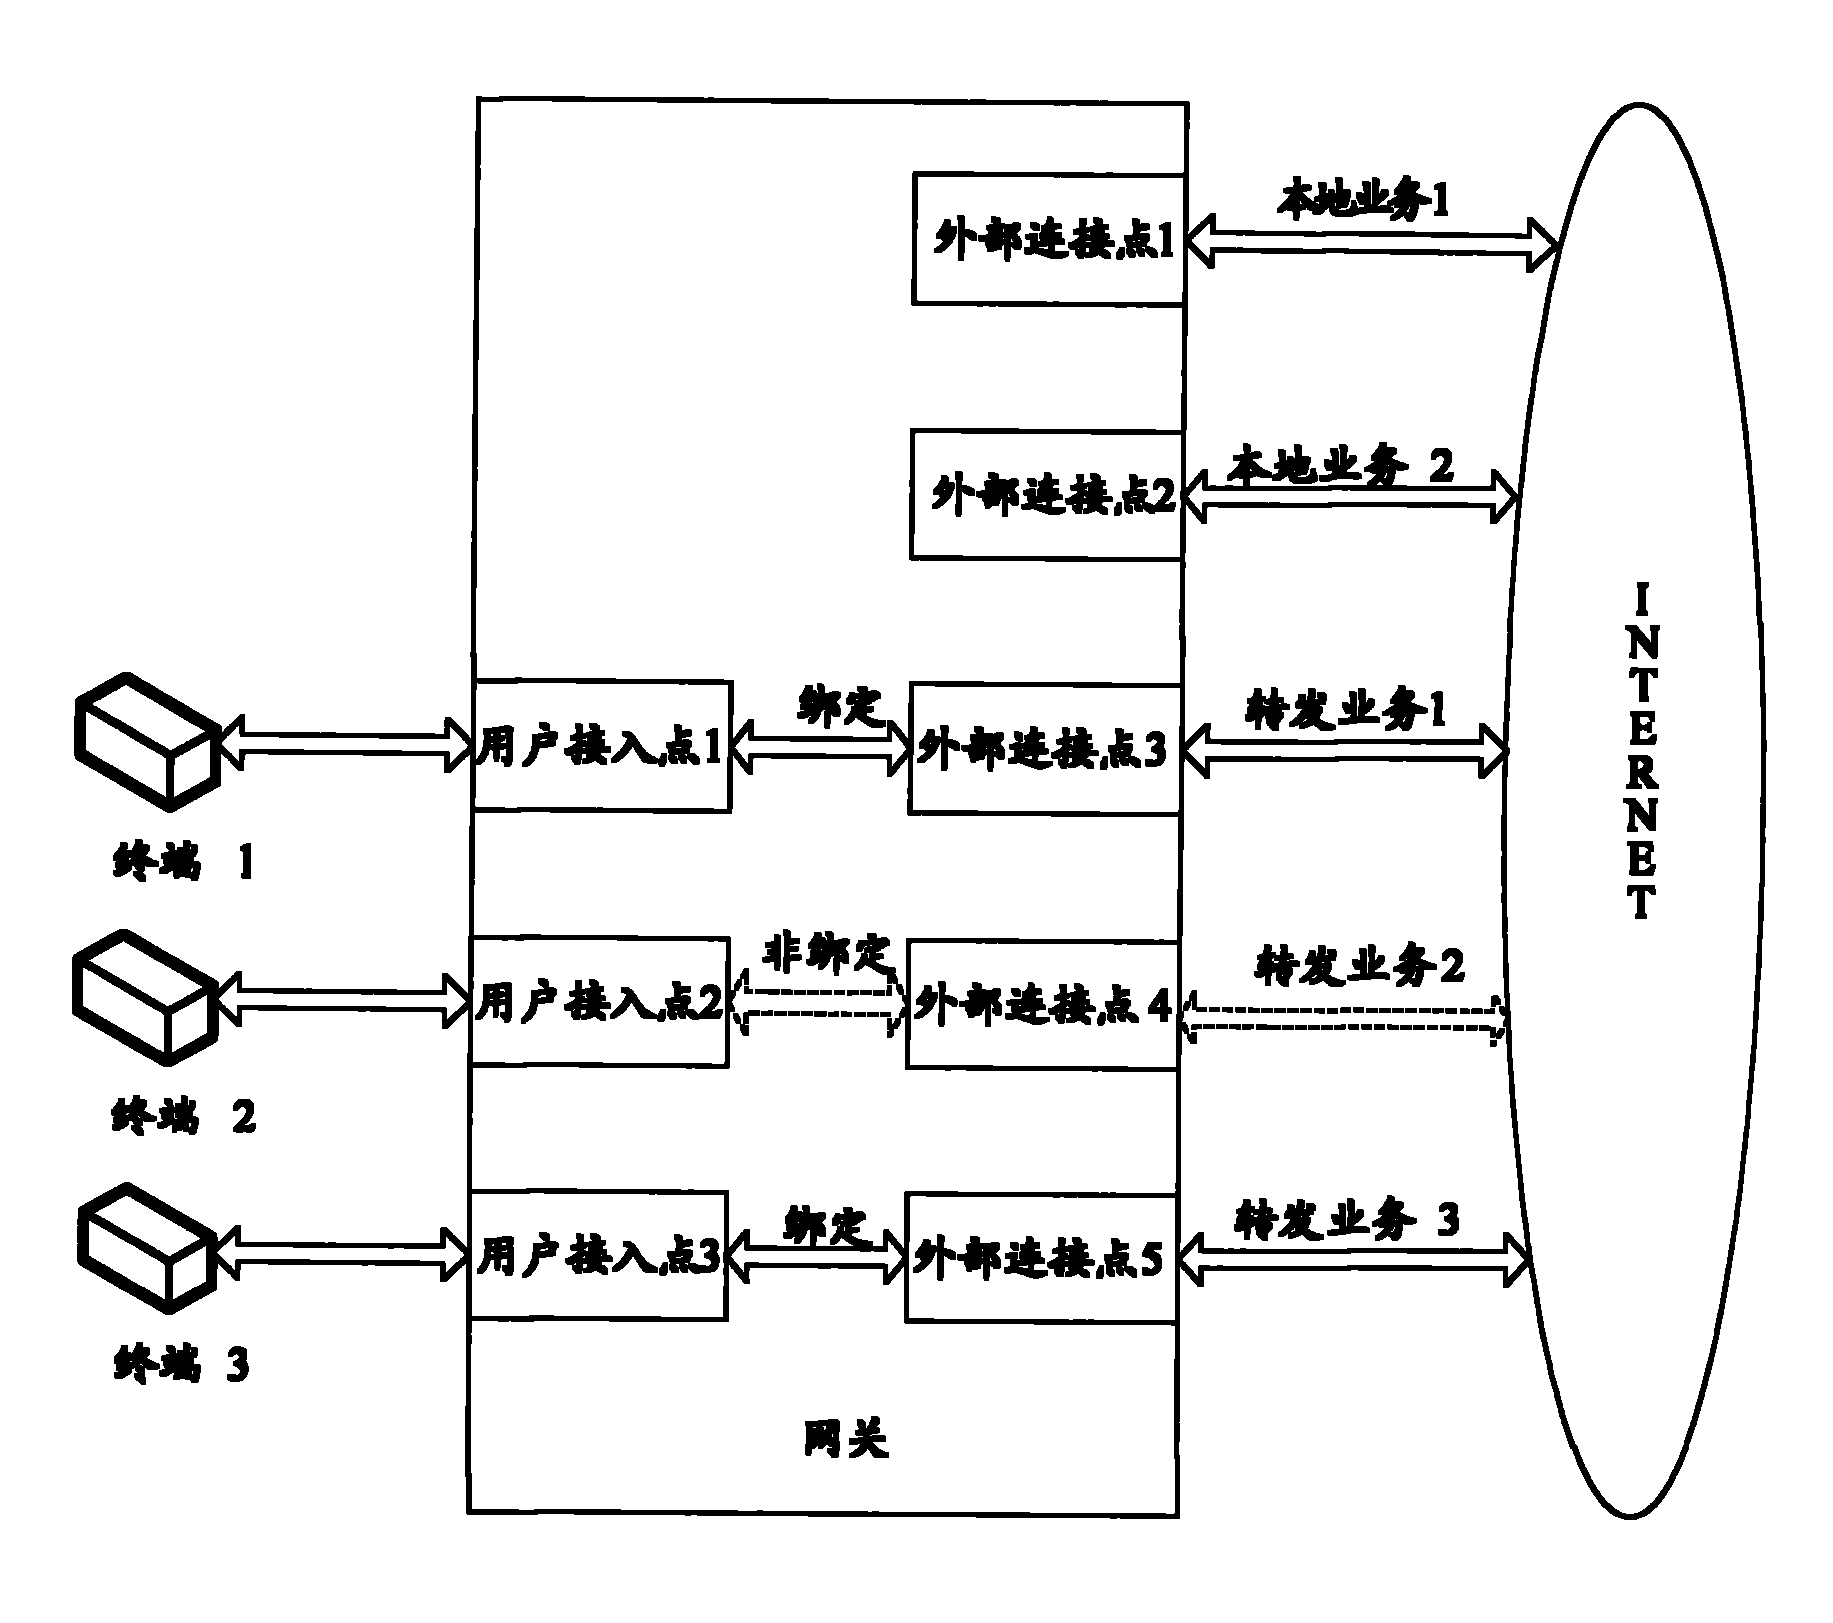 Implementing method for multi-service data flow selecting on gateway